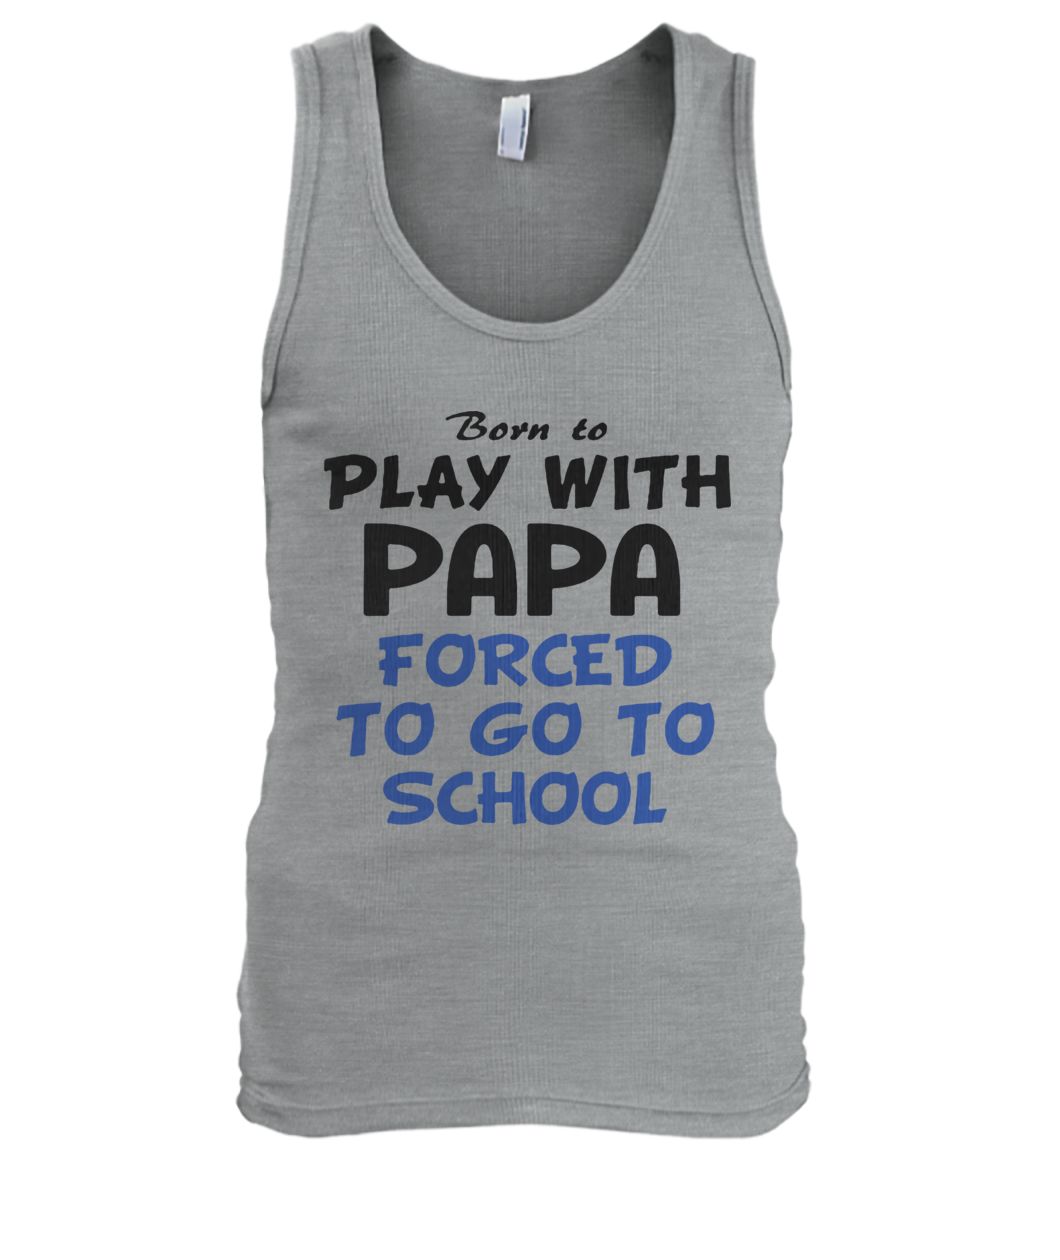 Born to play with papa forced to go to school men's tank top